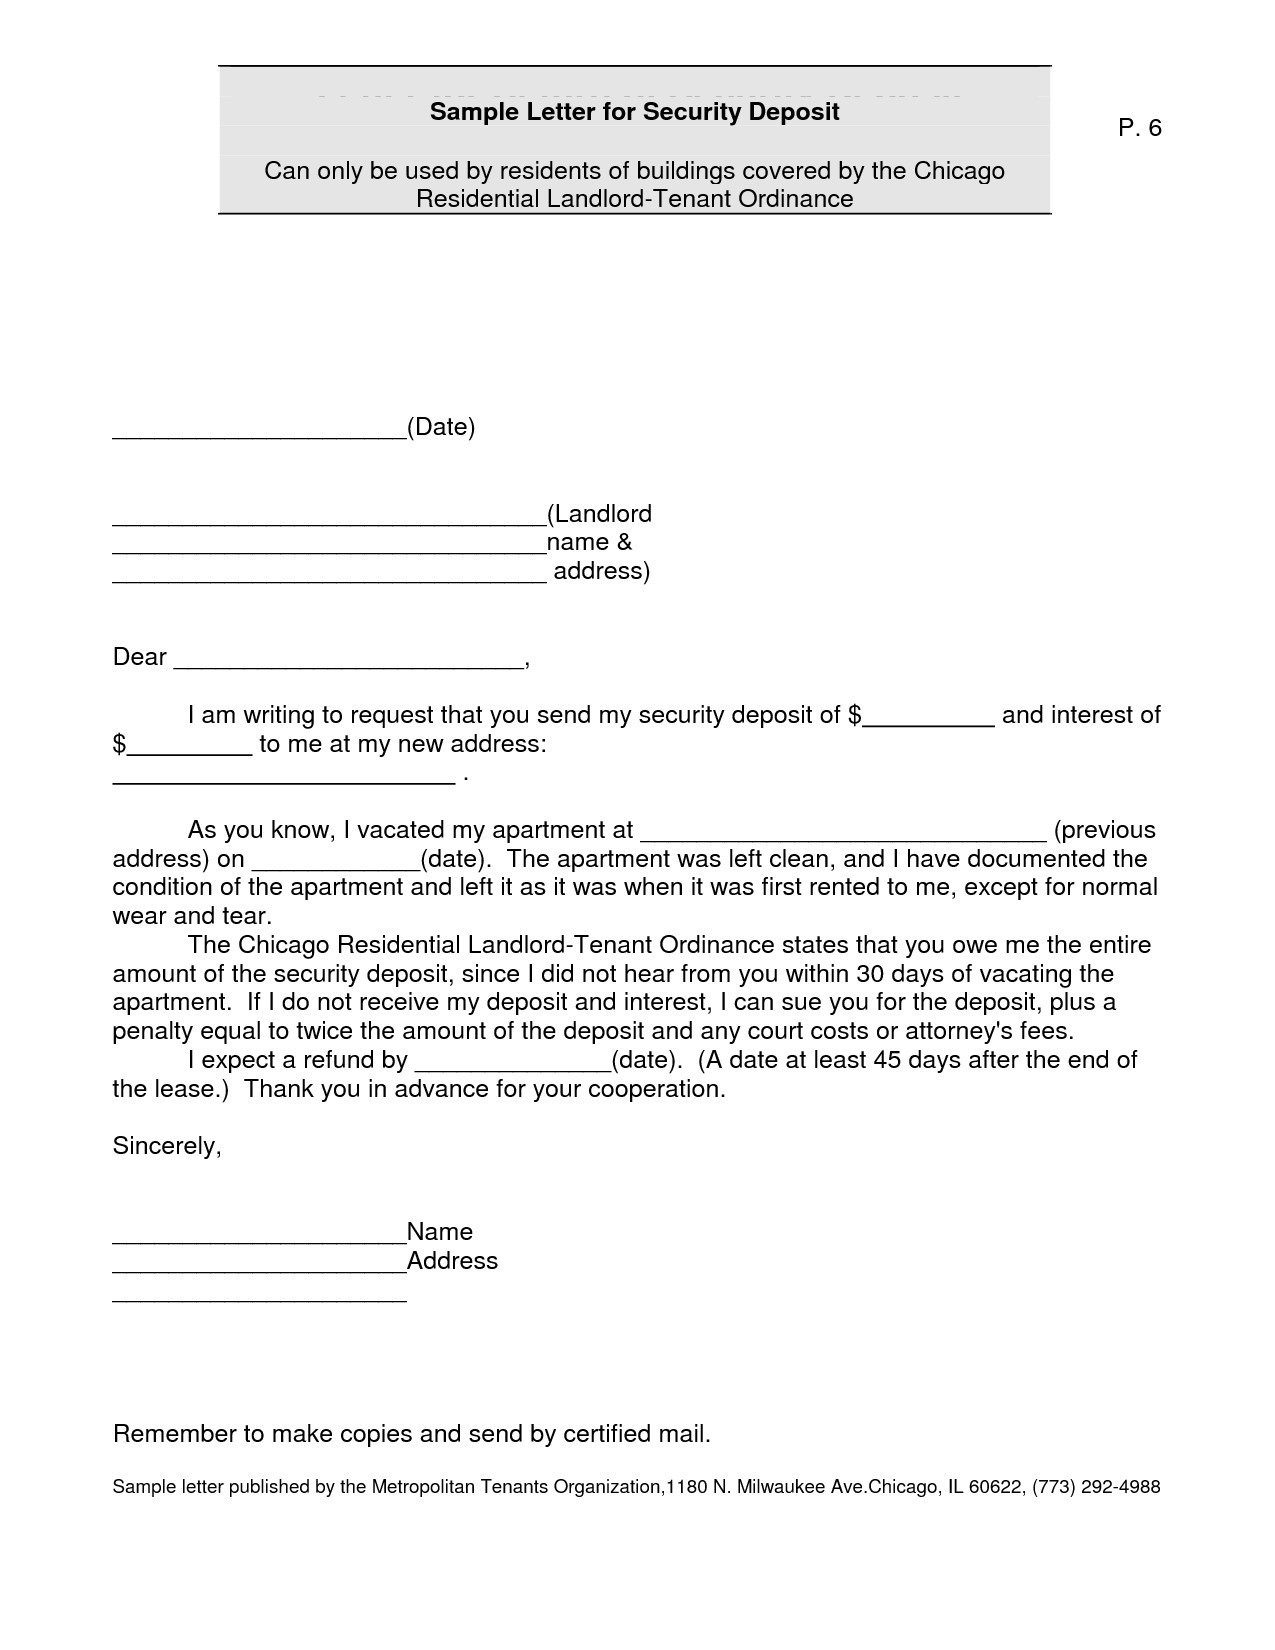 Security Deposit Demand Letter Template - New Refund Letter Best Letter format for Requesting A Refund Best